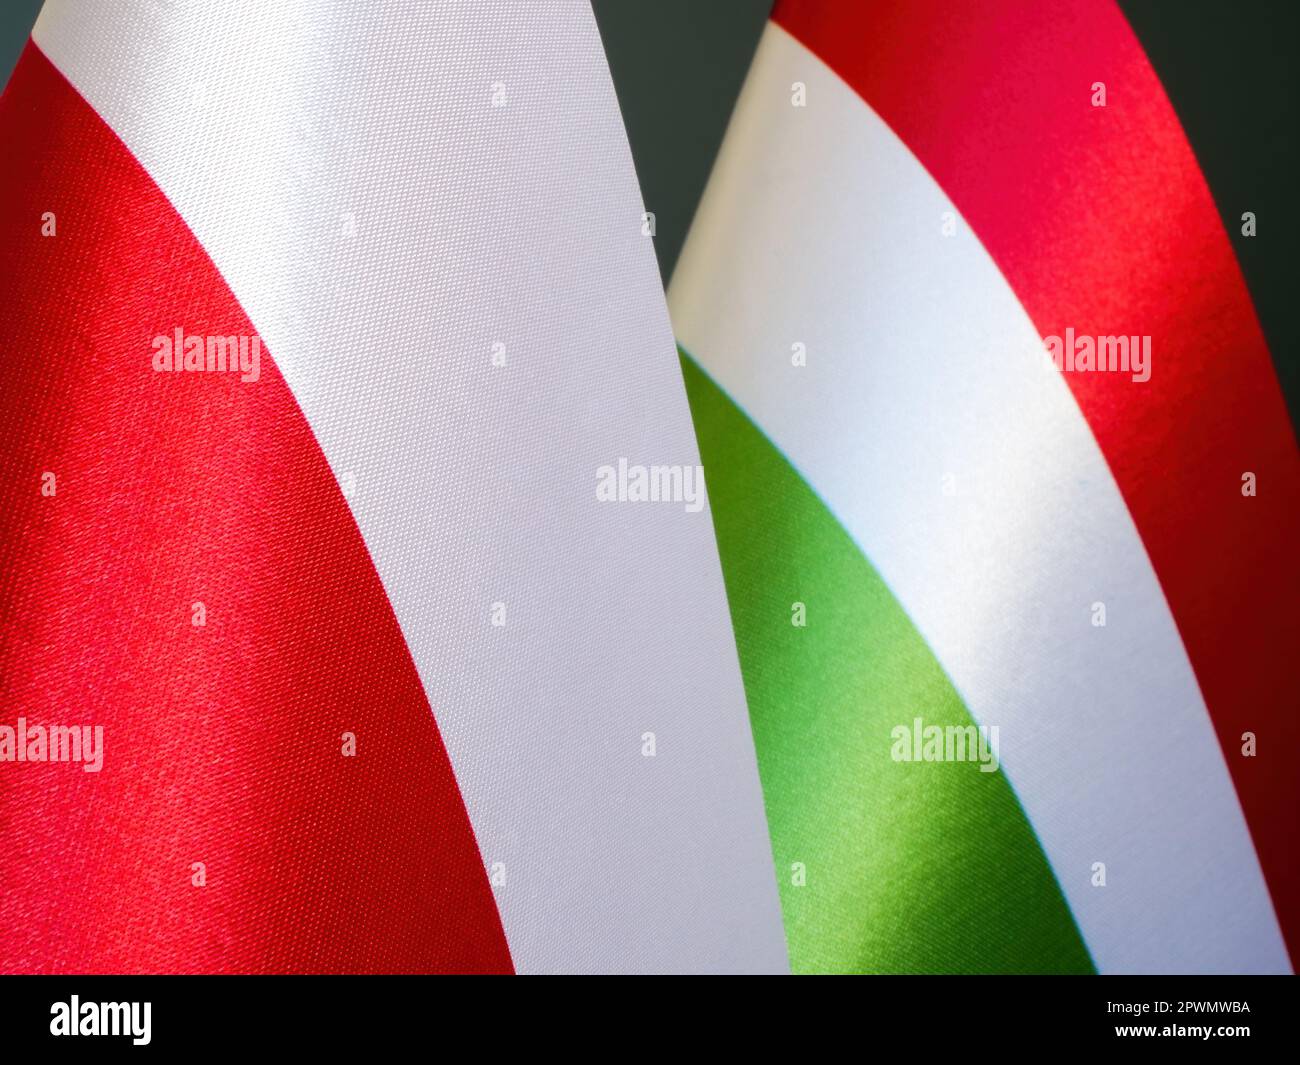 Flags of Poland and Hungary side by side Stock Photo - Alamy